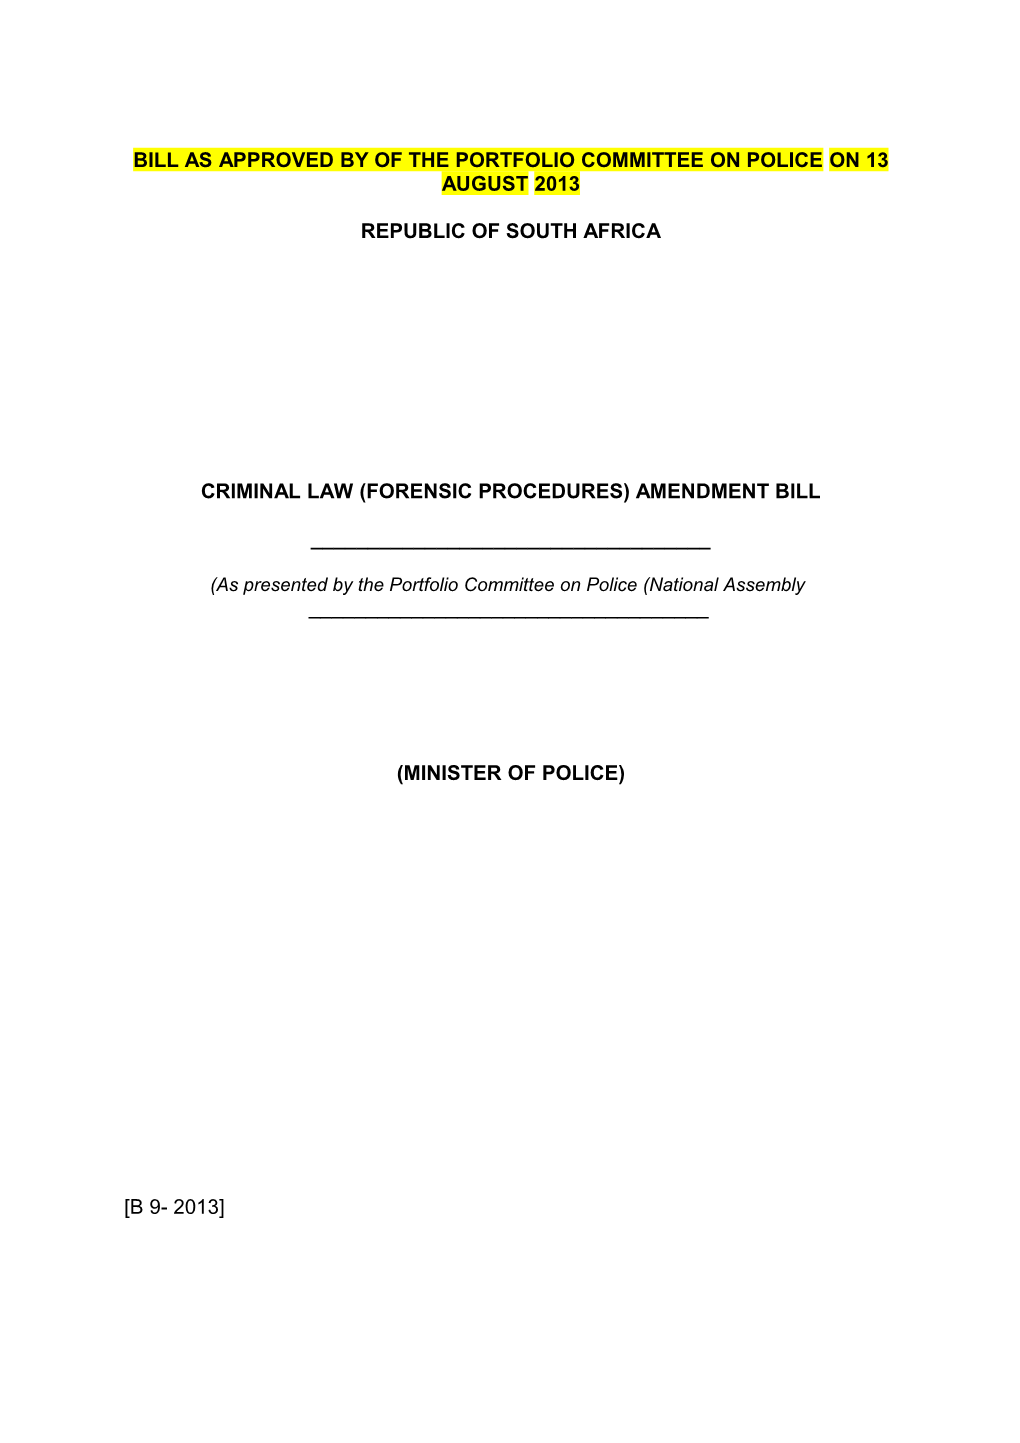 Bill As Approved by of the Portfolio Committee on Police on 13 August 2013